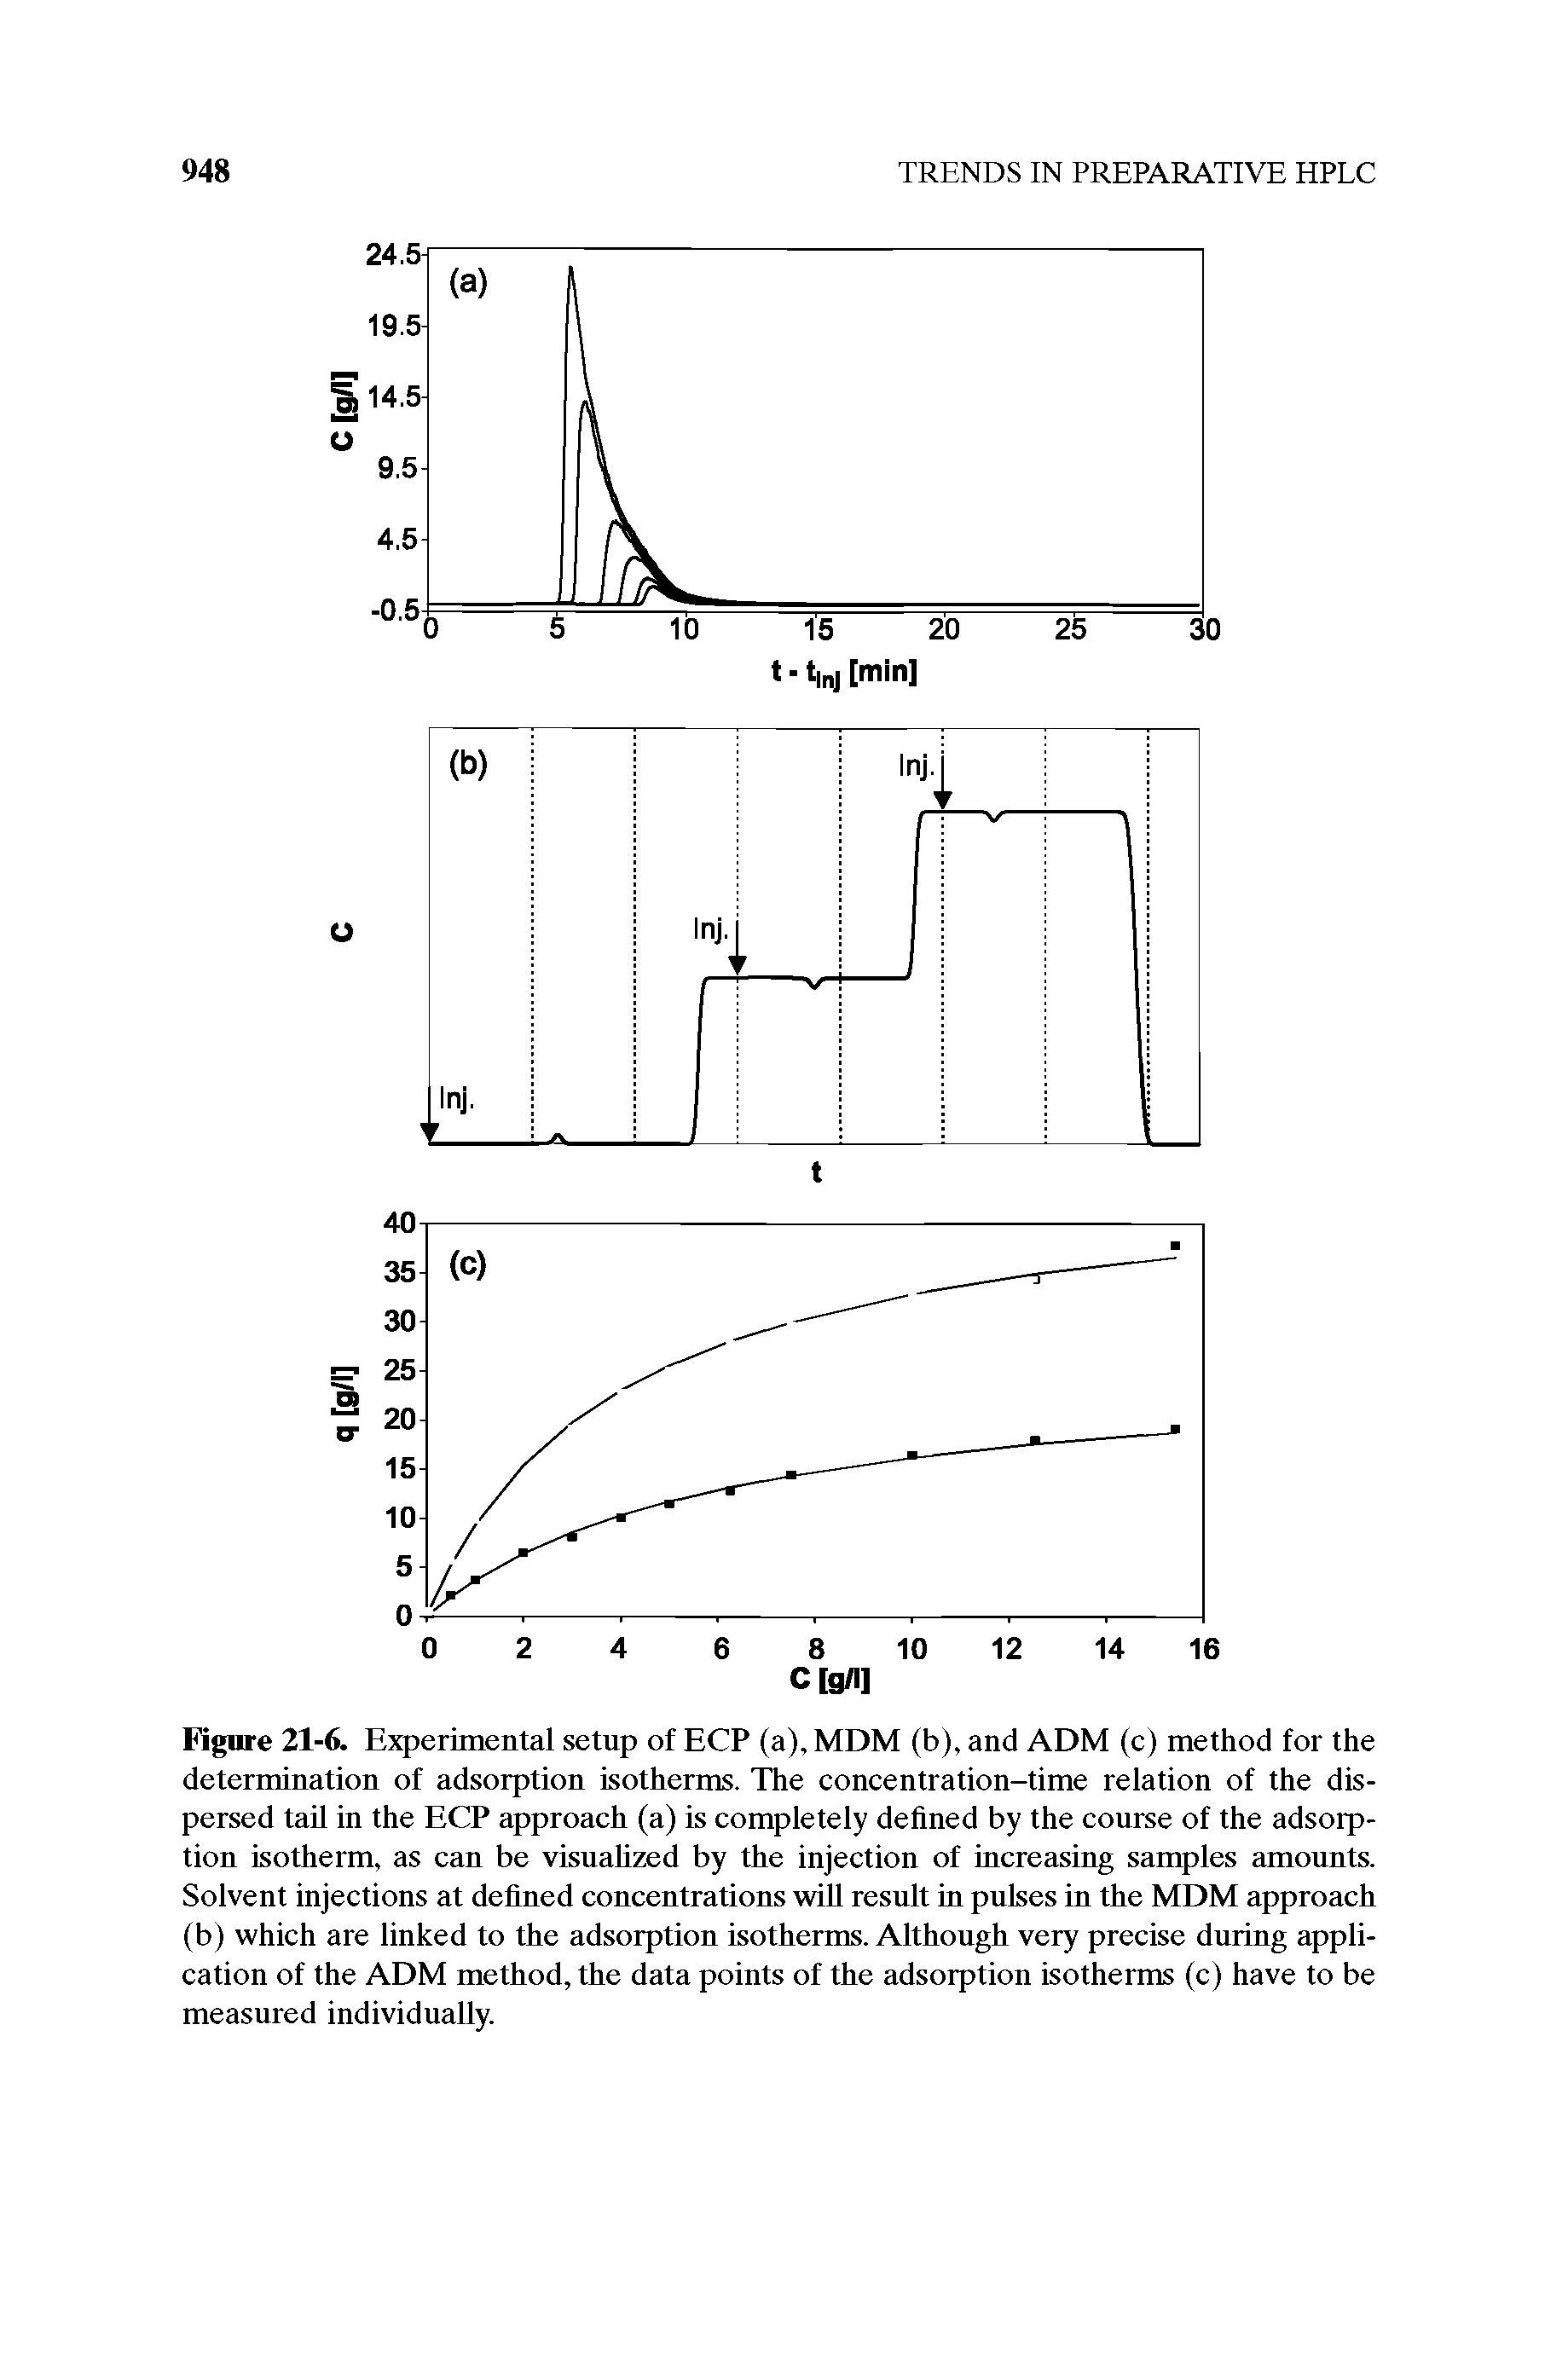 Figure 21-6. Experimental setup of ECP (a), MDM (b), and ADM (c) method for the determination of adsorption isotherms. The concentration-time relation of the dispersed taU in the ECP approach (a) is completely defined by the course of the adsorption isotherm, as can be visuahzed by the injection of increasing samples amounts. Solvent injections at defined concentrations will result in pulses in the MDM approach (b) which are linked to the adsorption isotherms. Although very precise during application of the ADM method, the data points of the adsorption isotherms (c) have to be measnred individually.